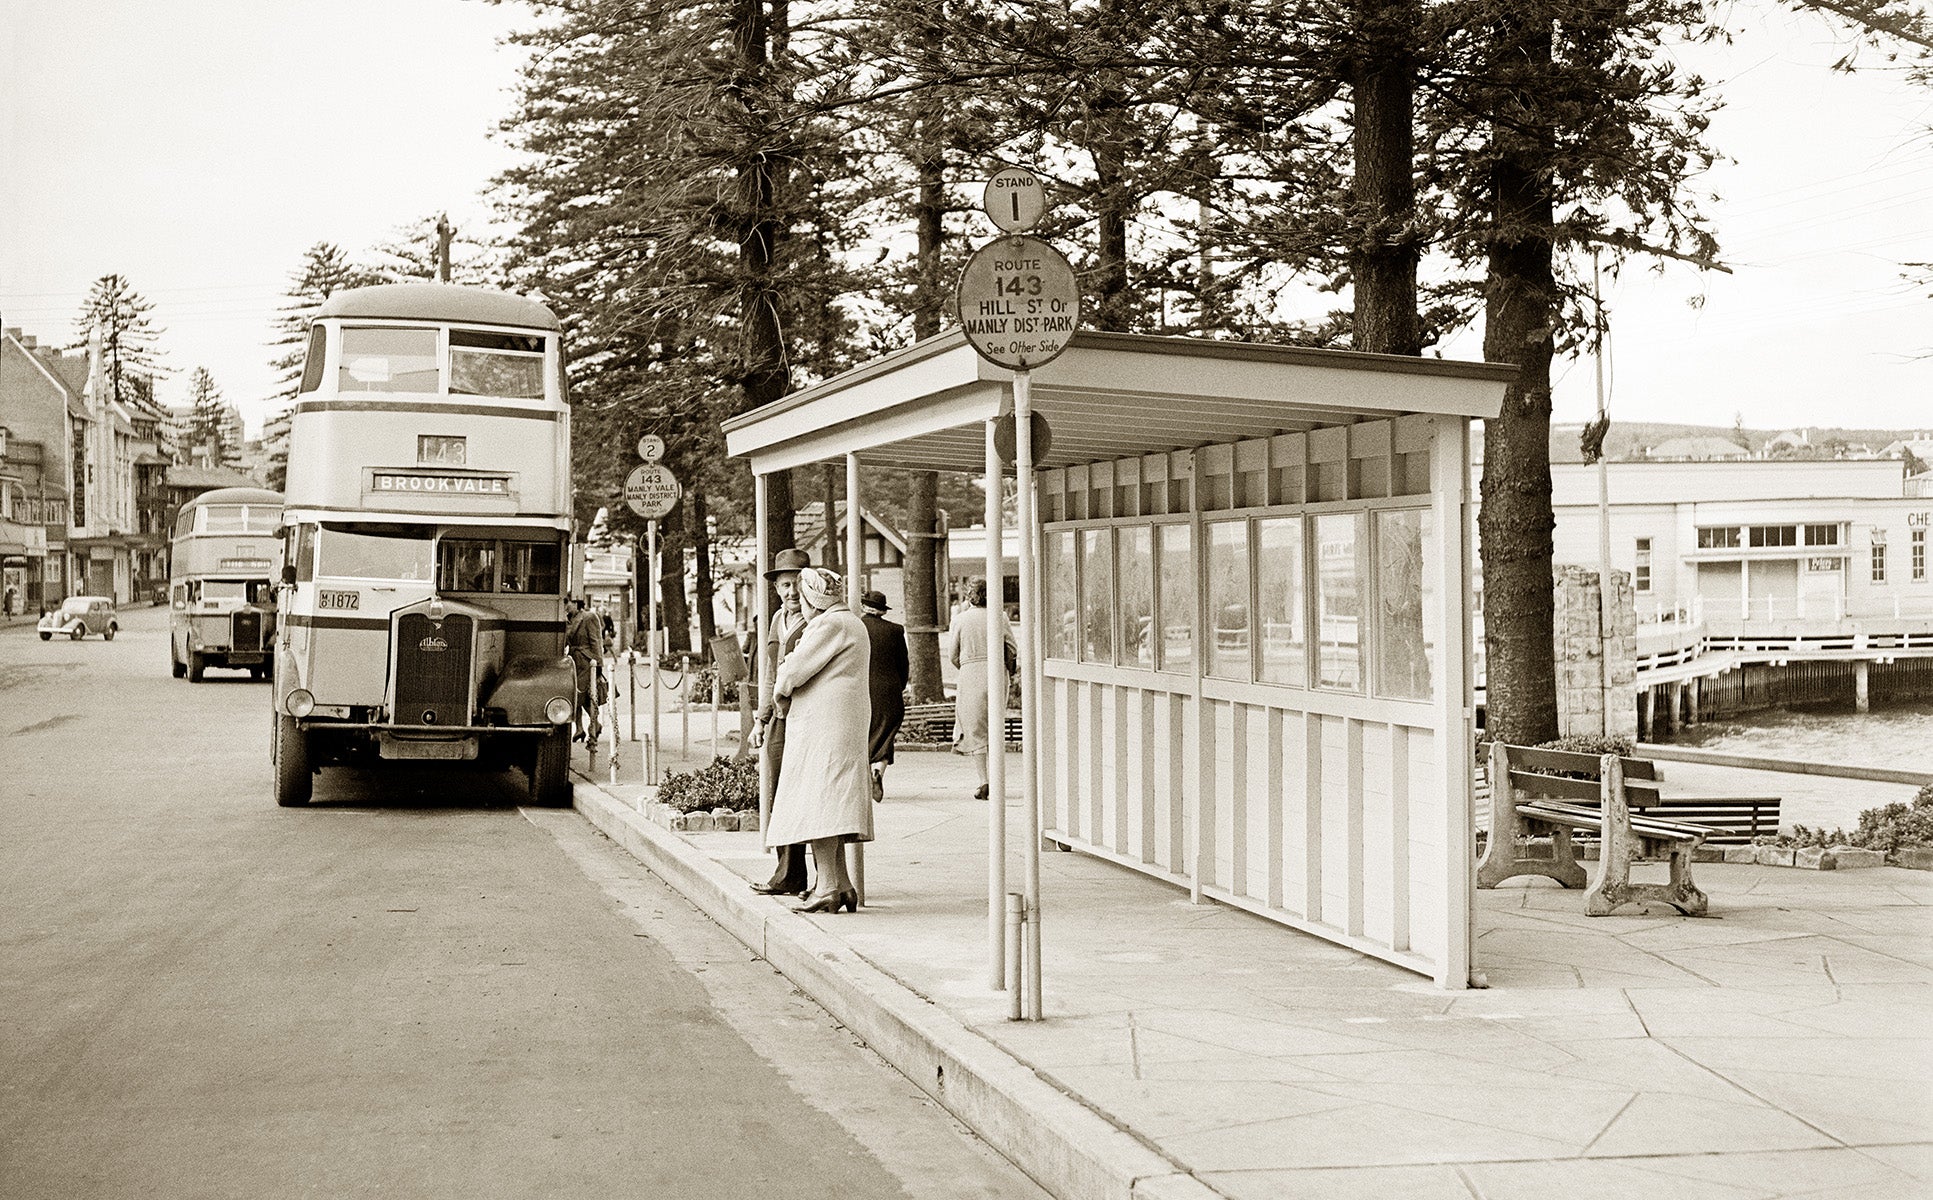 Waiting For The Bus At Manly Wharf, Manly NSW Australia 1940s